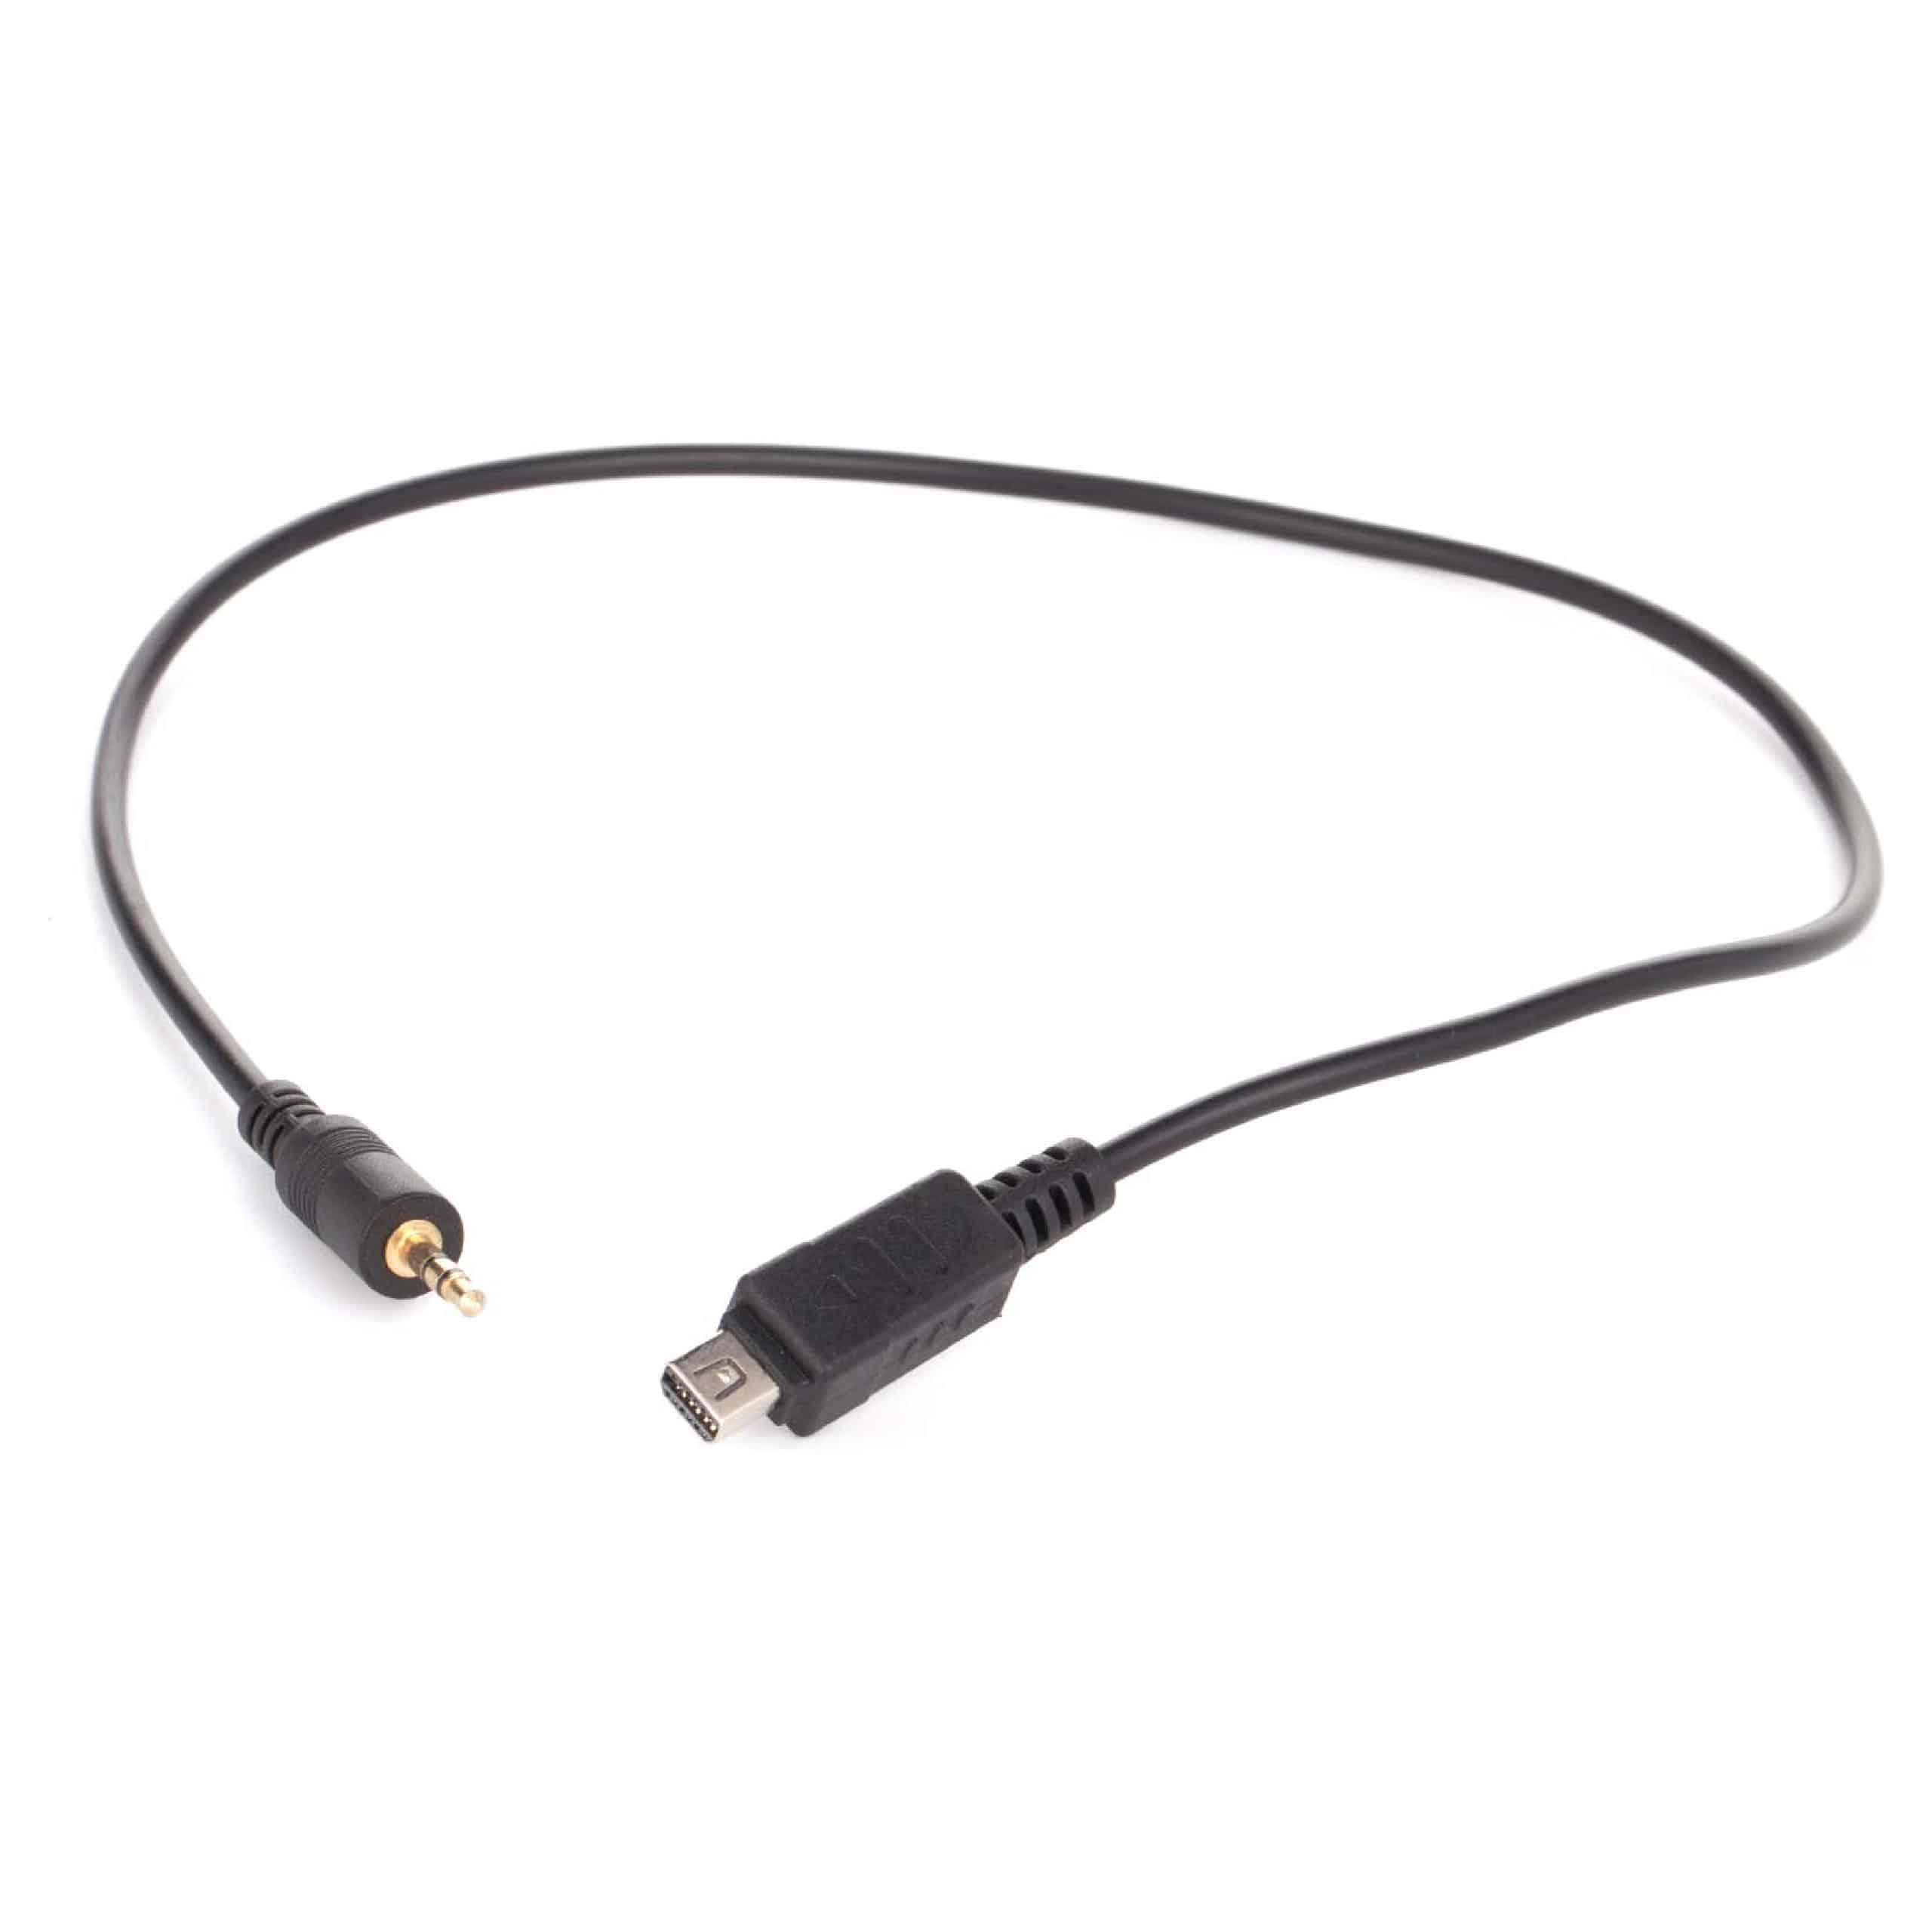 Cable for Shutter Release suitable for E-400 Olympus E-400 Camera - 35 cm